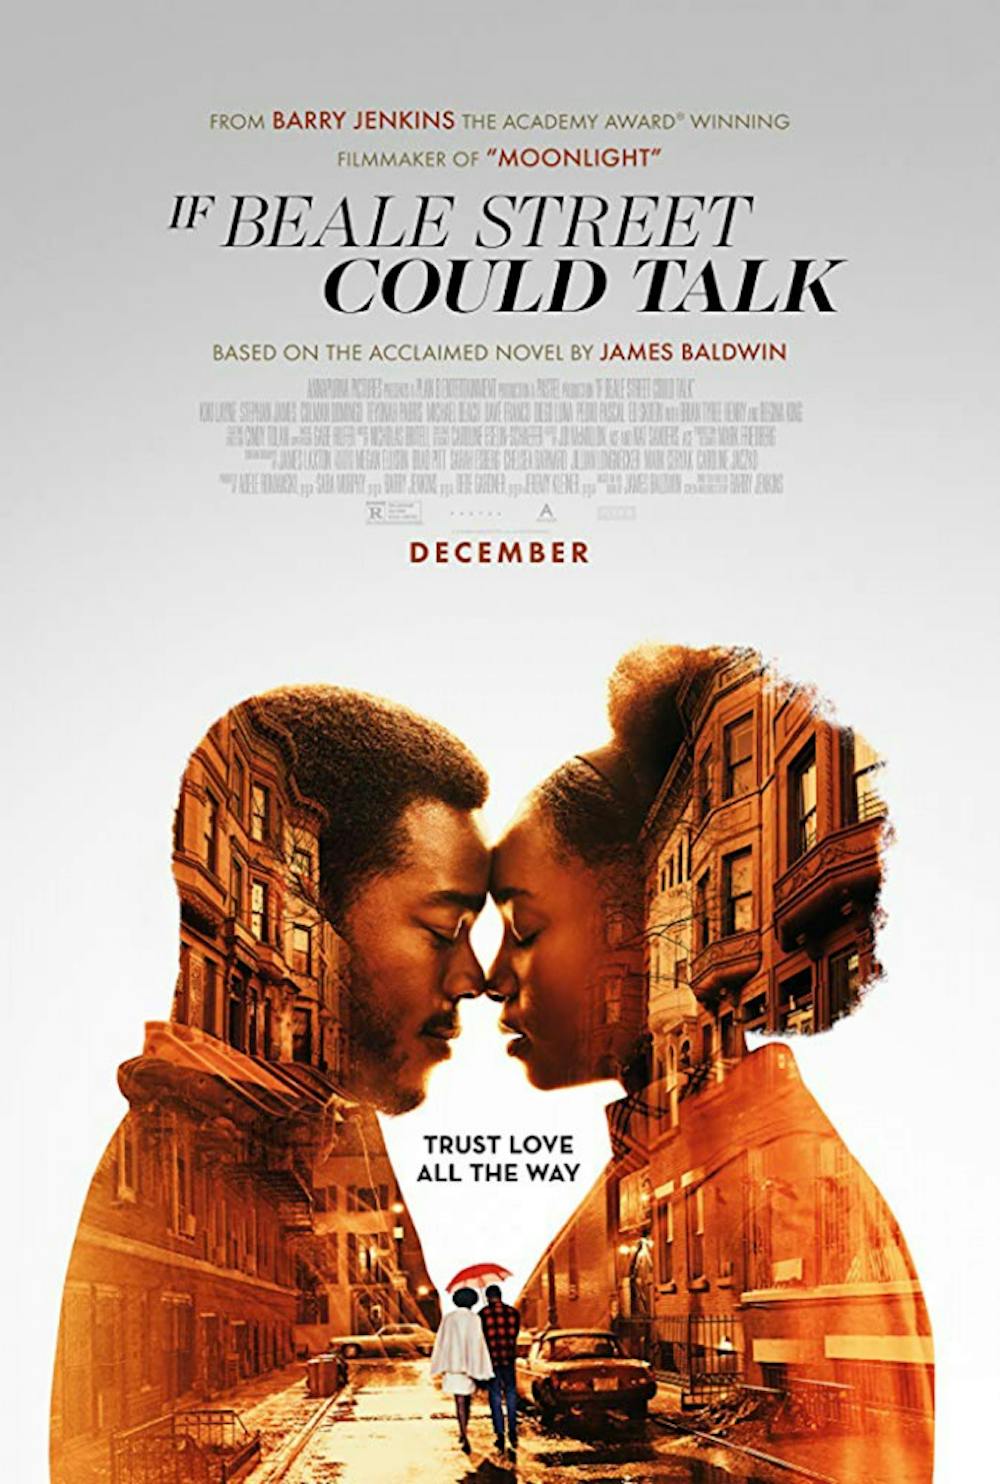 <p>Virginia Film Festival presented "If Beale Street Could Talk" on its final day.</p>